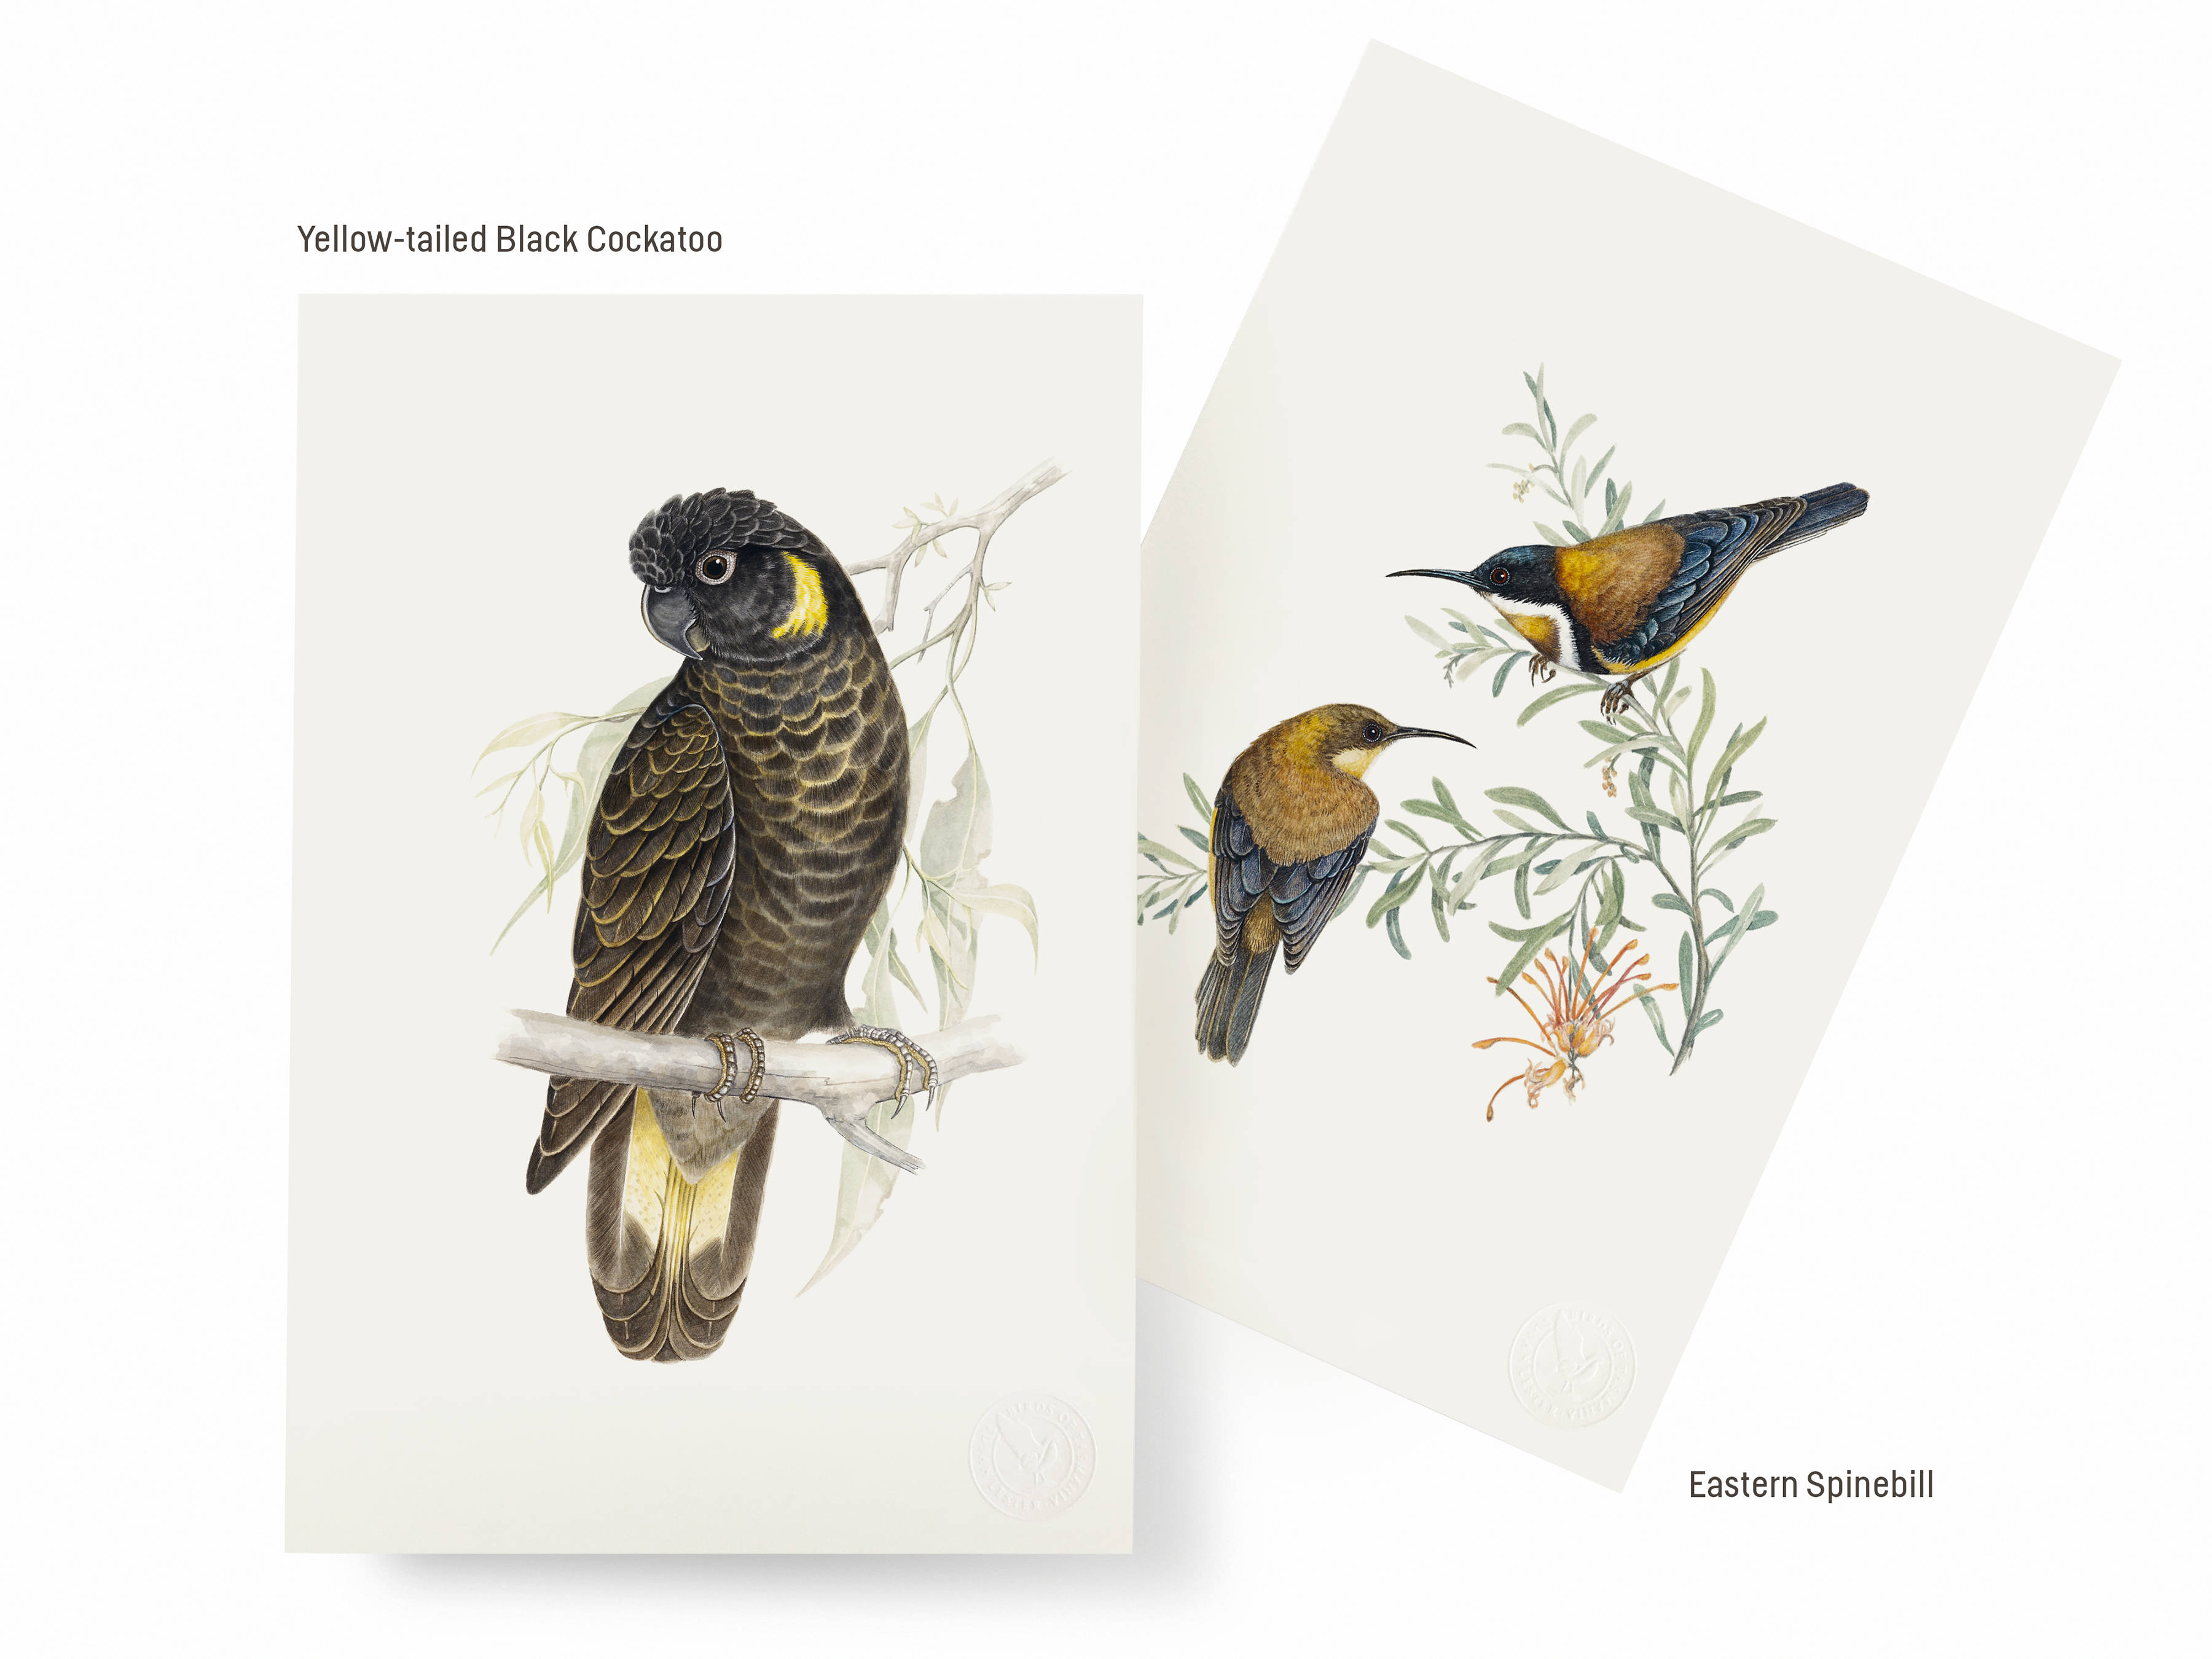 Two of the selection of six artworks available as part of the special BOXED edition: Yellow-tailed Cockatoo on the left, Eastern Spinebill on the right.